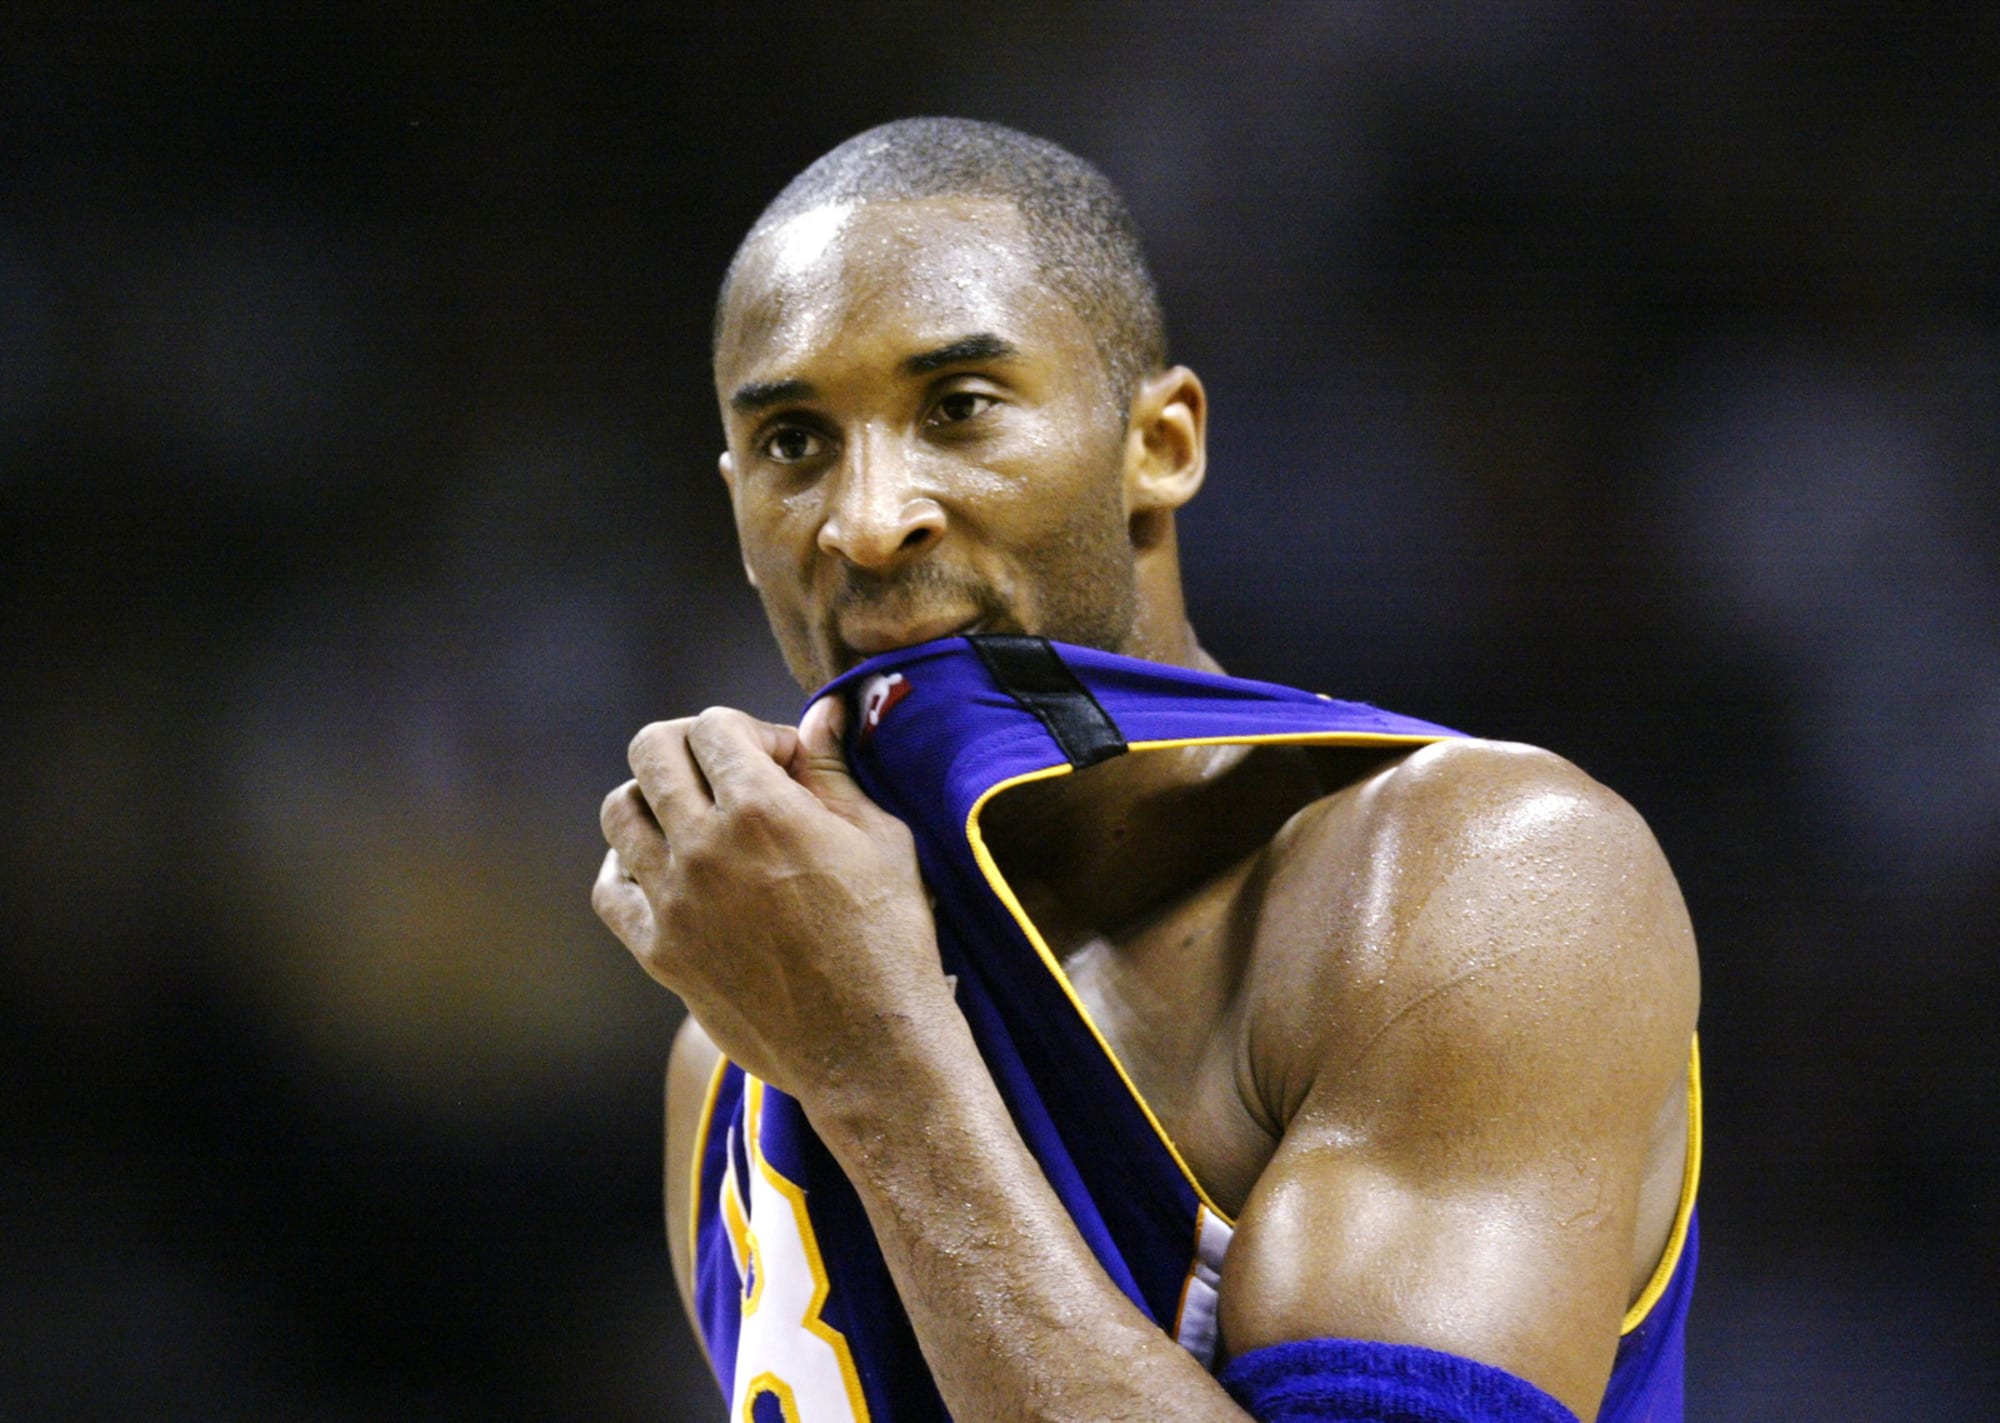 Kobe Bryant's 81-point game against the Raptors was fueled by pepperoni  pizza